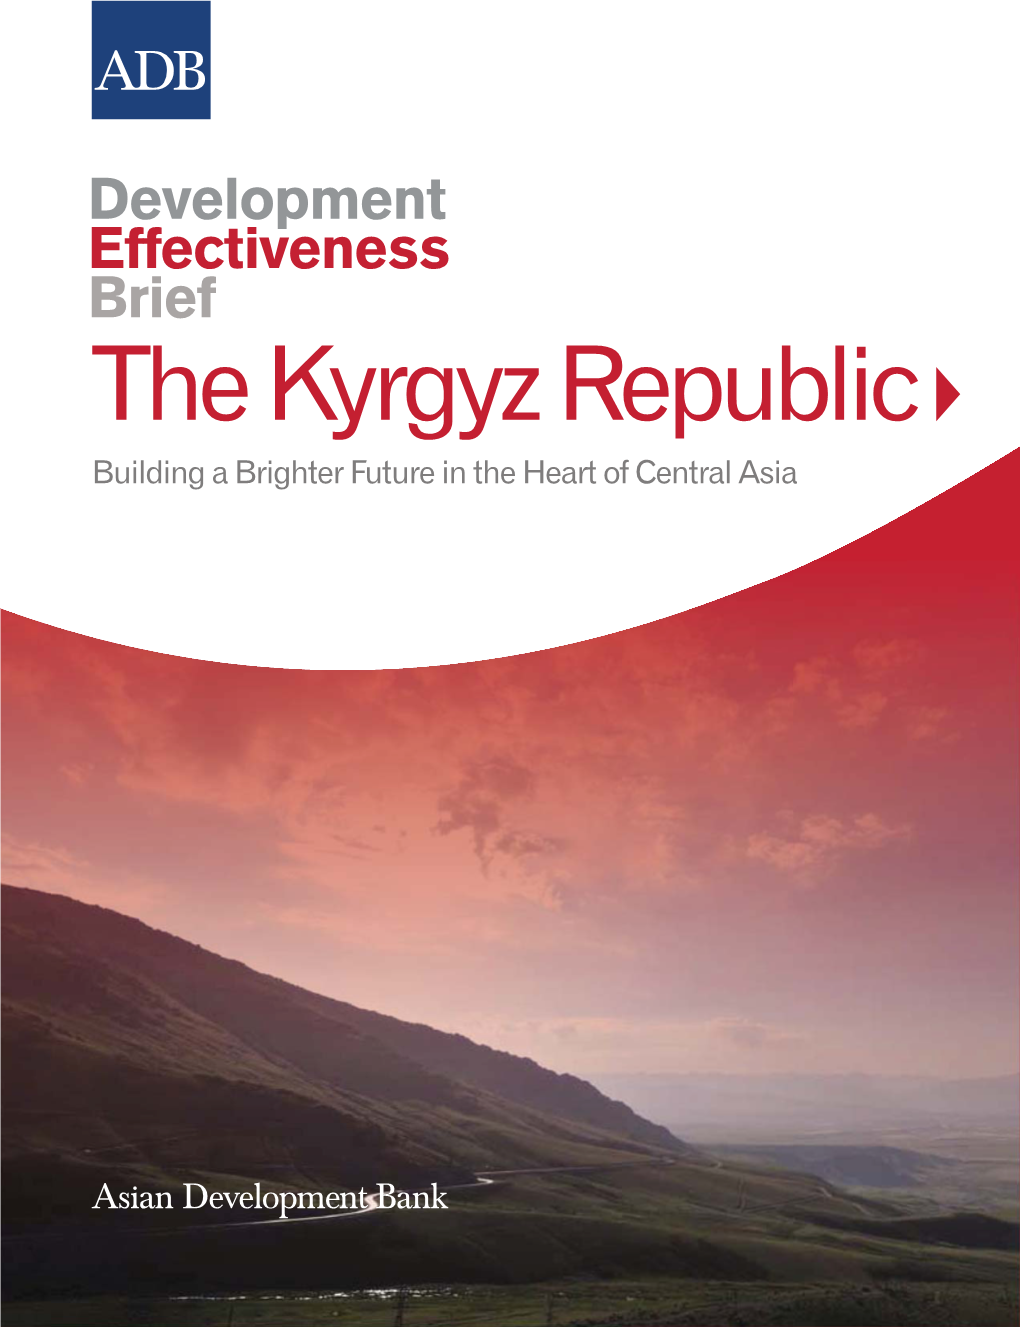 The Kyrgyz Republic Building a Brighter Future in the Heart of Central Asia